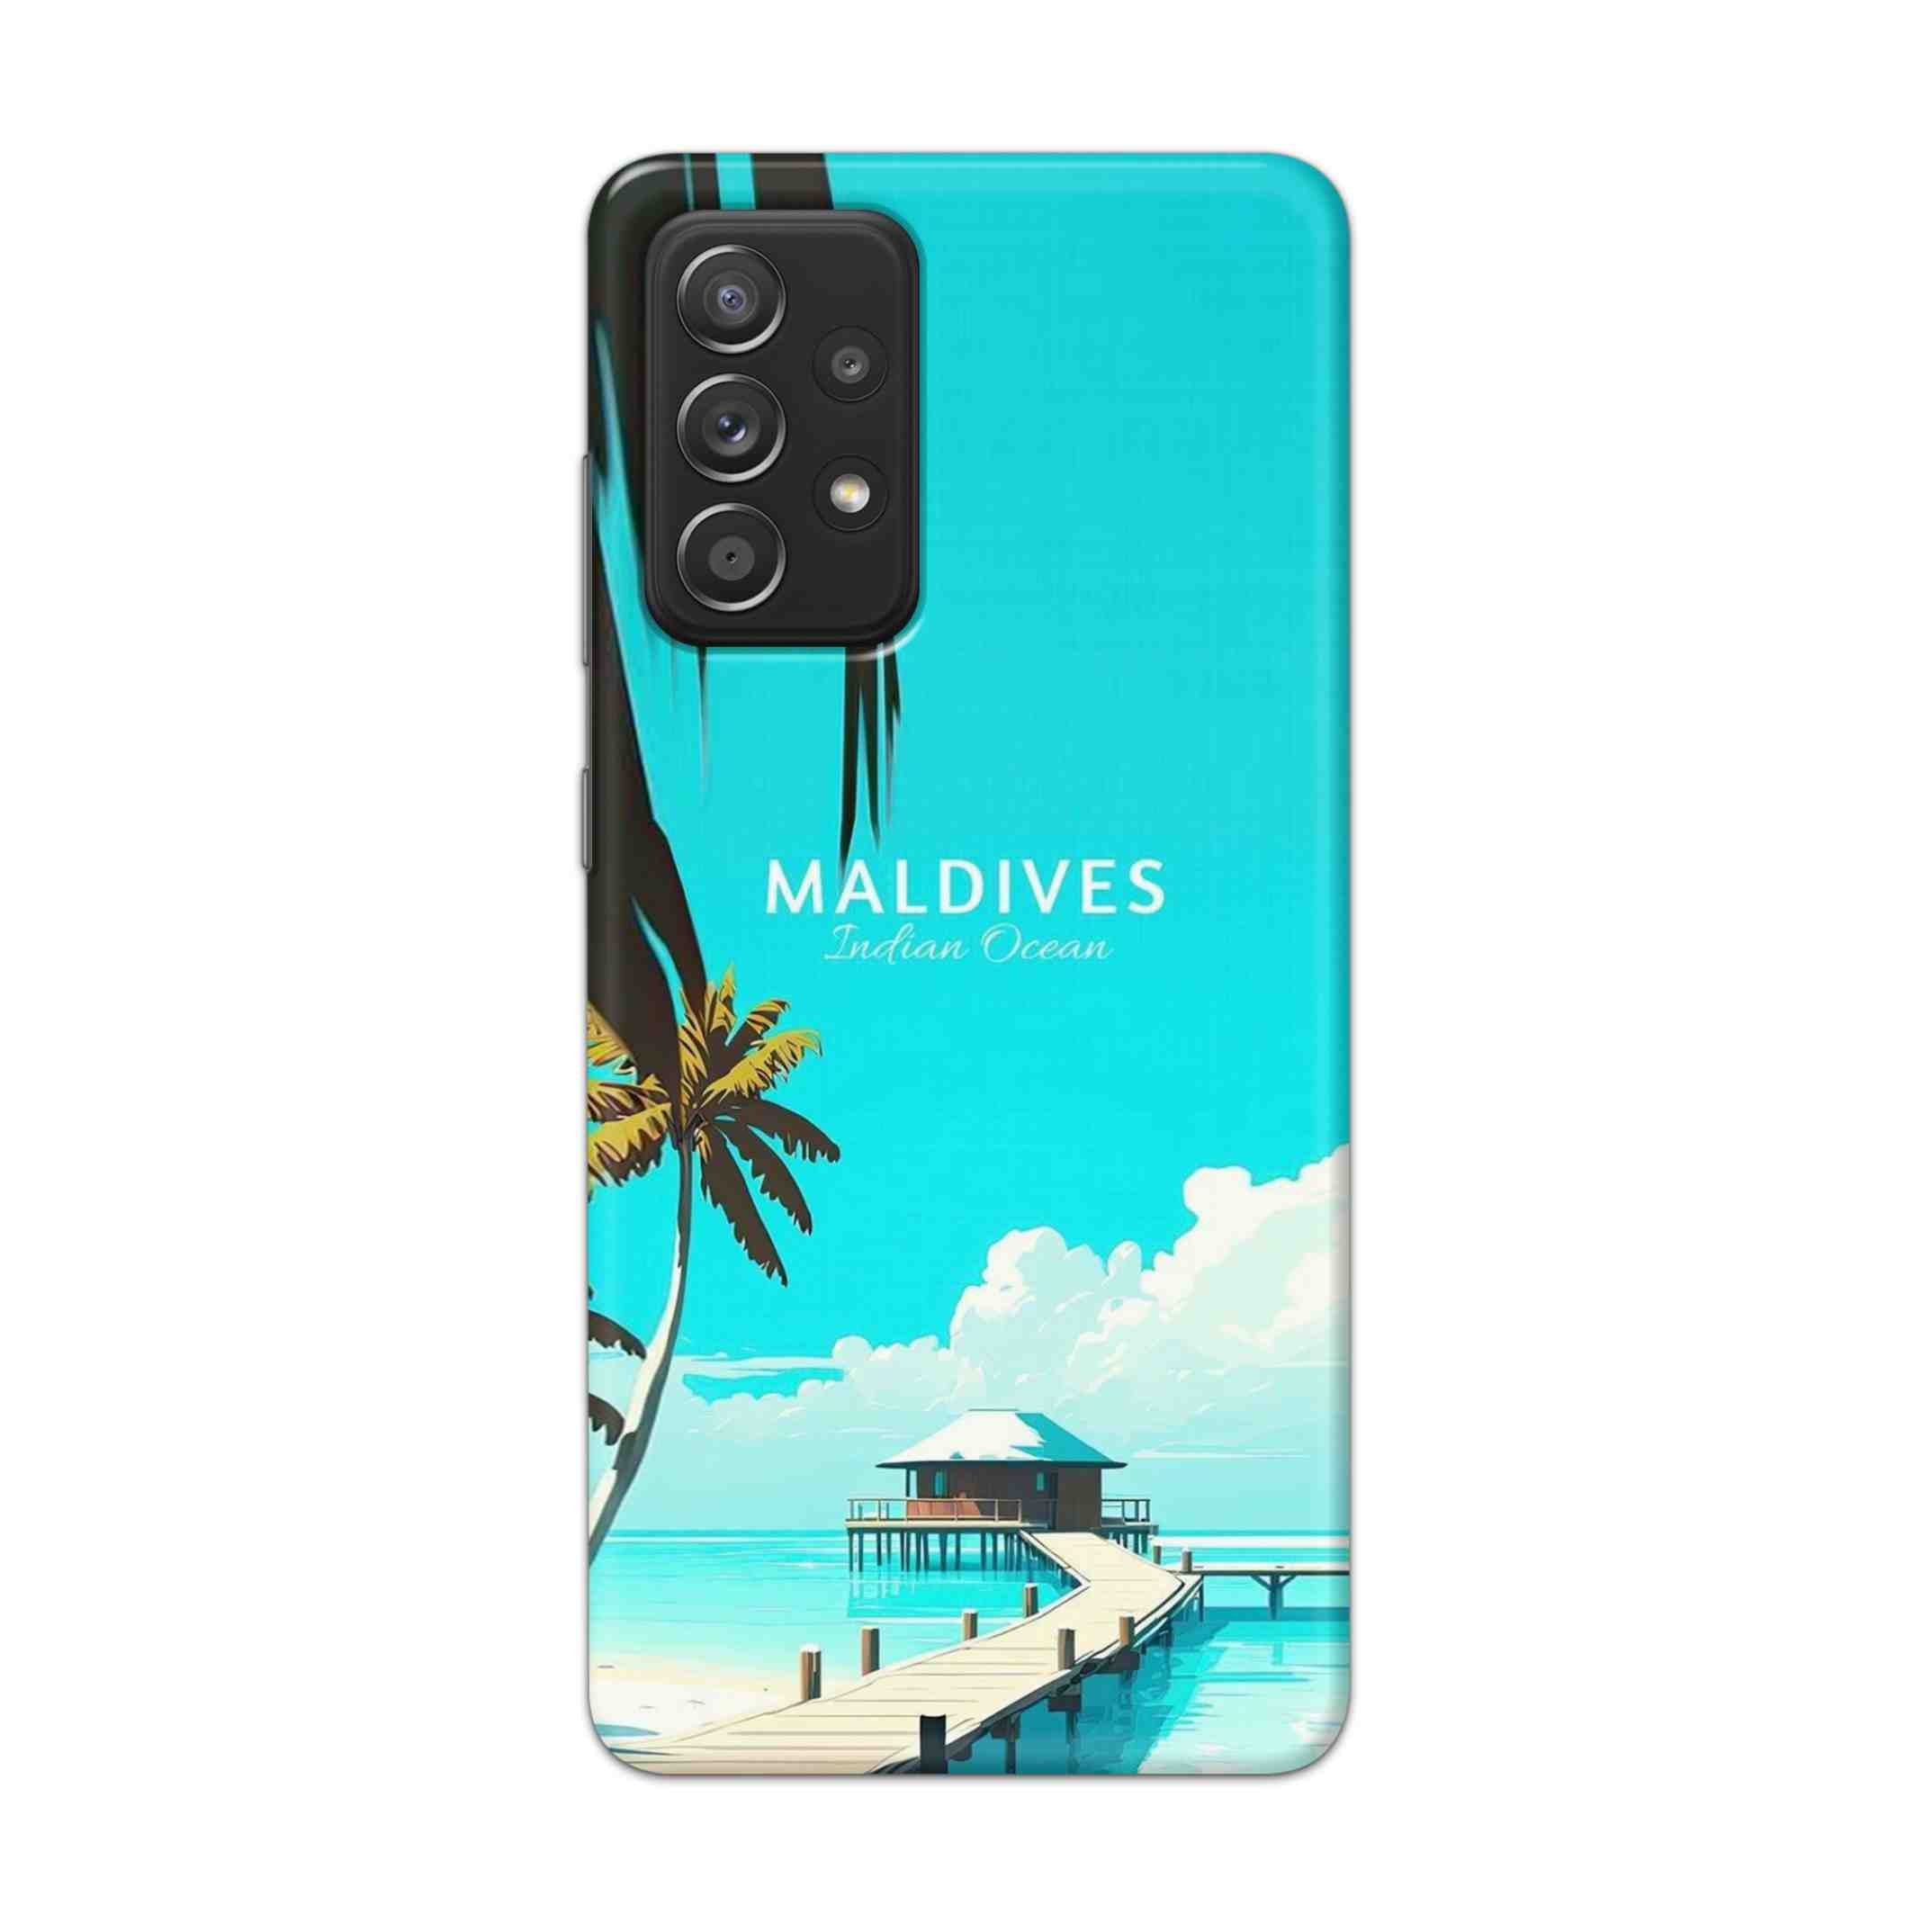 Buy Maldives Hard Back Mobile Phone Case Cover For Samsung Galaxy A52 Online